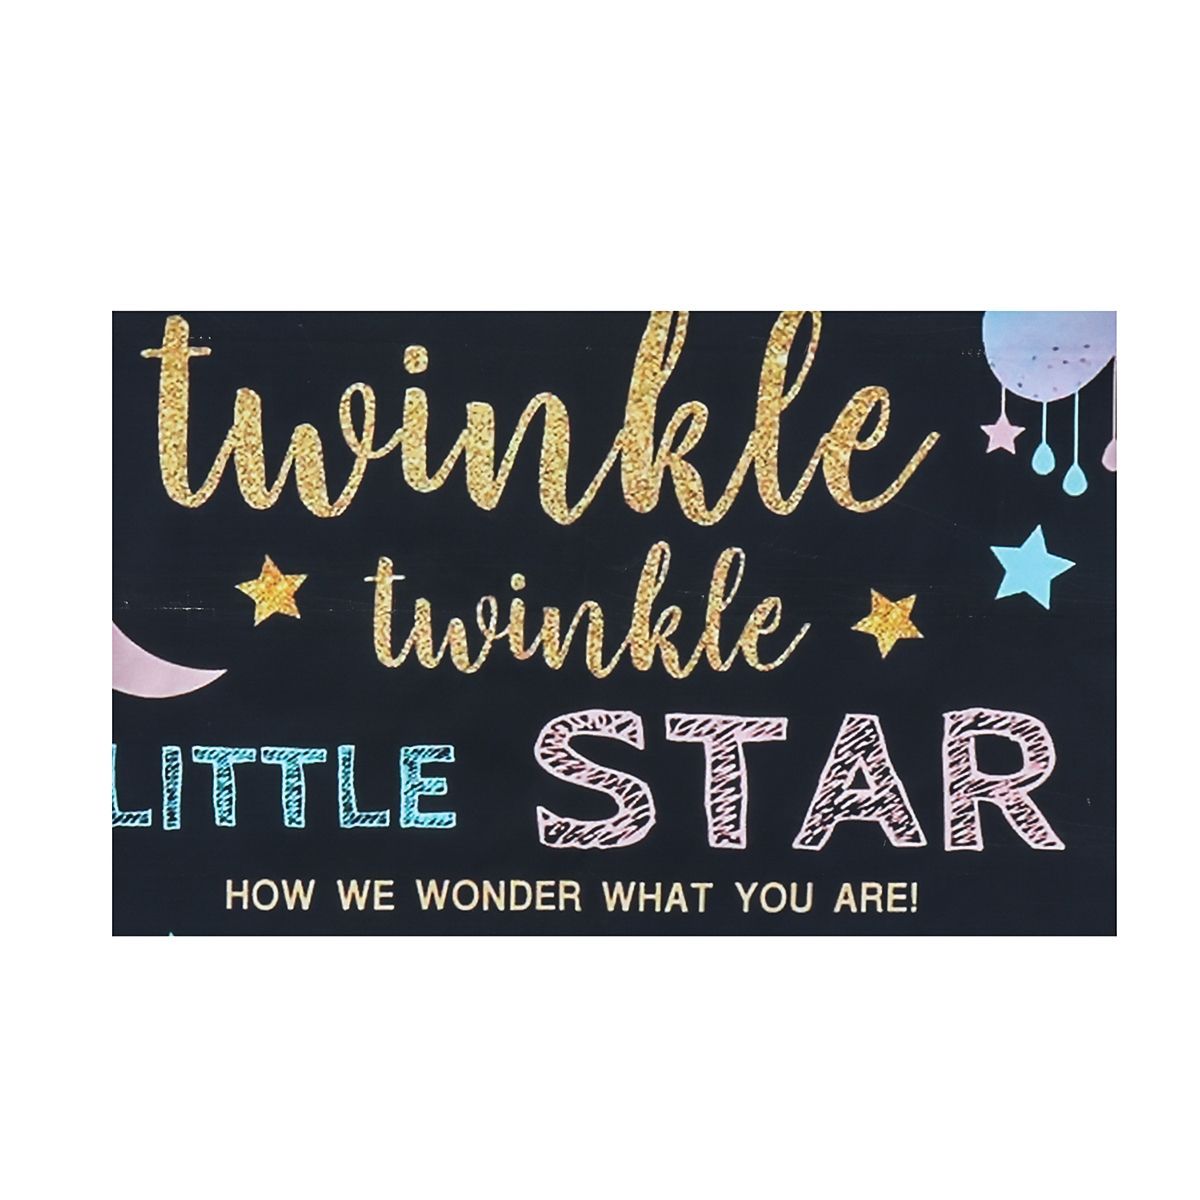 Little-Star-Backdrop-Baby-Shower-Photography-Background-Party-Banner-Backdrops-150x100cm-220x150cm-2-1717697